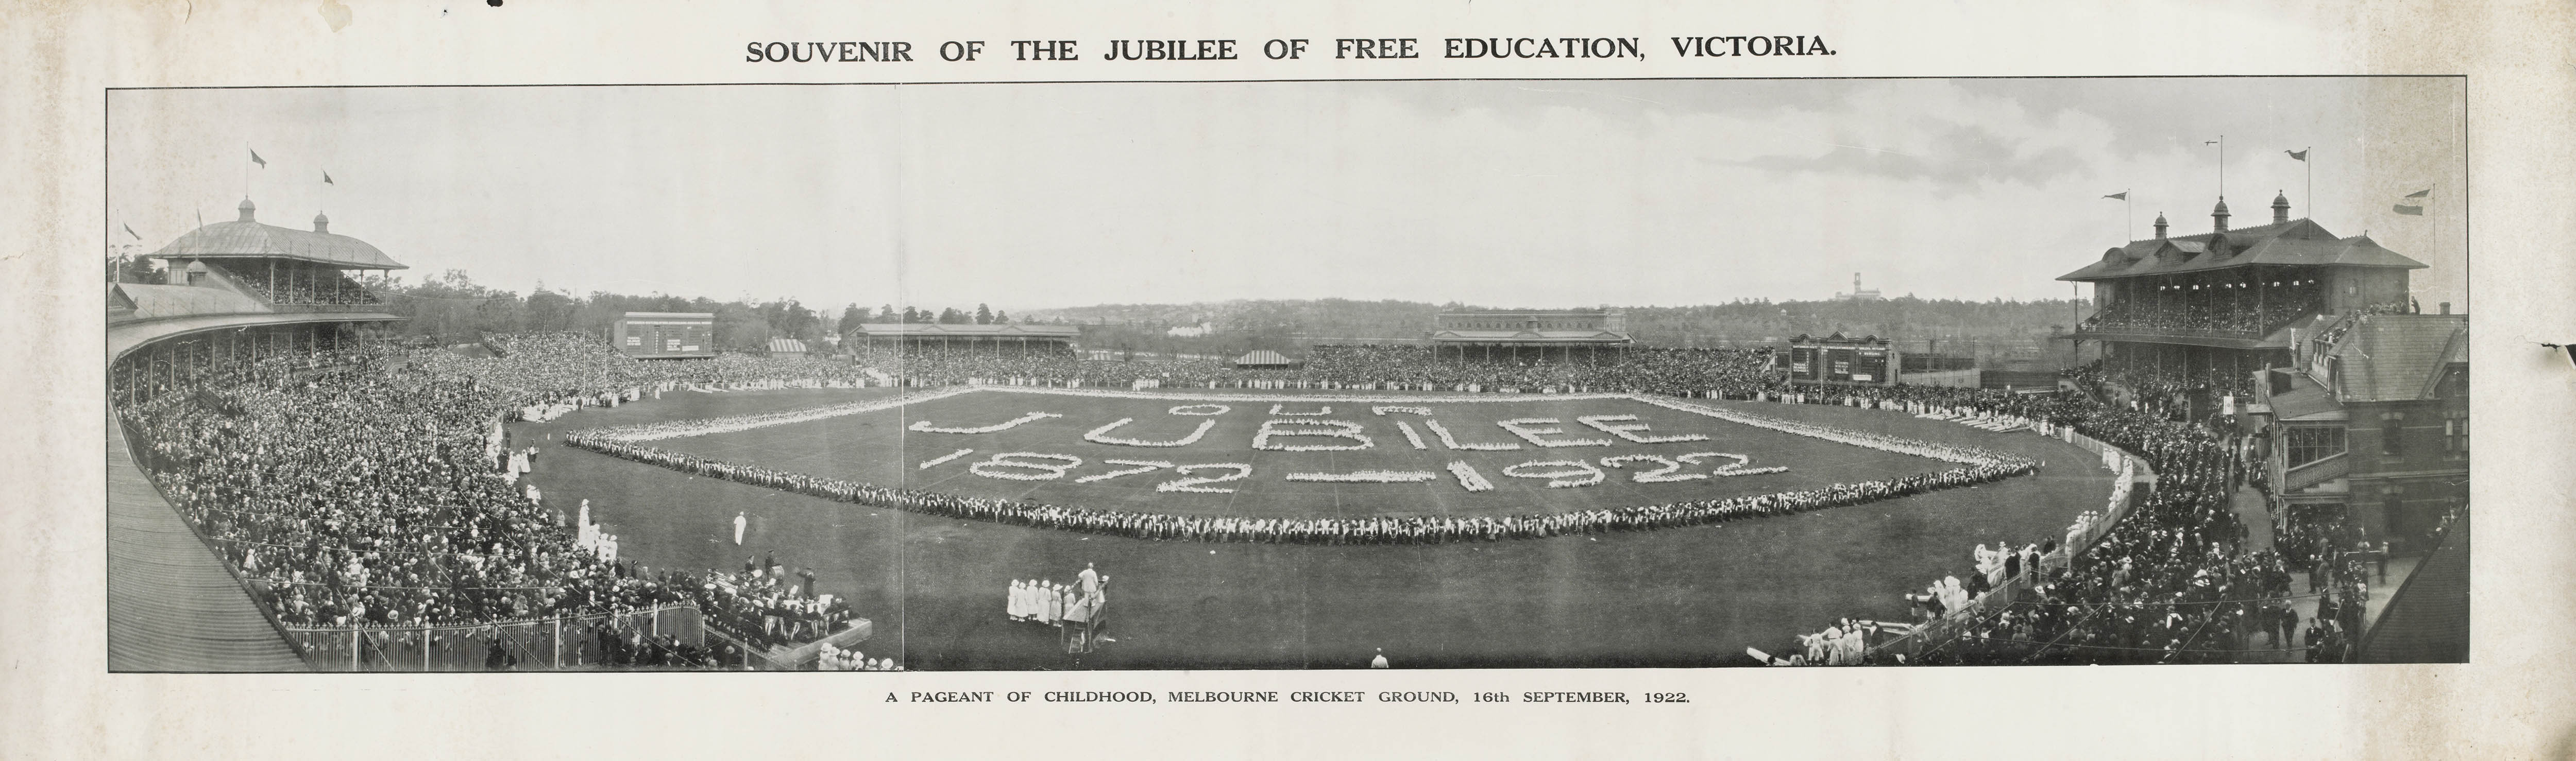  Souvenir of the Jubilee of Free Education, Victoria, 1922.